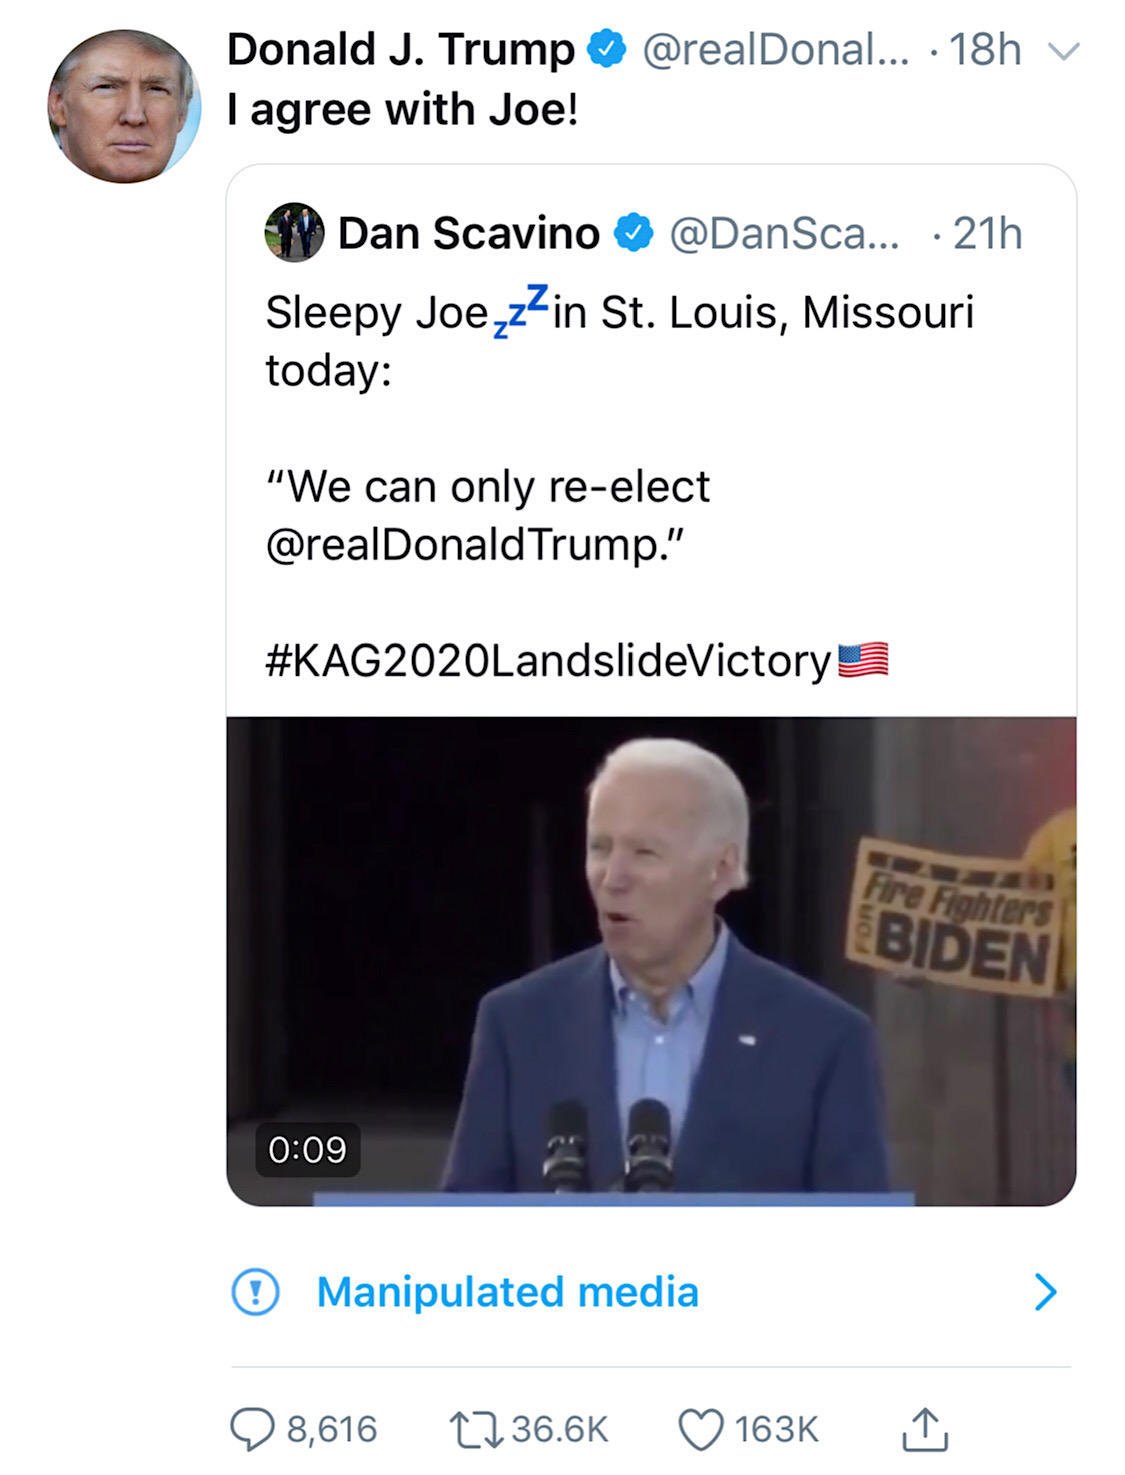 Twitter’s “Manipulated media” label appeared for the first time on a video clip of 2020 presidential candidate Joe Biden that was shared by President Trump